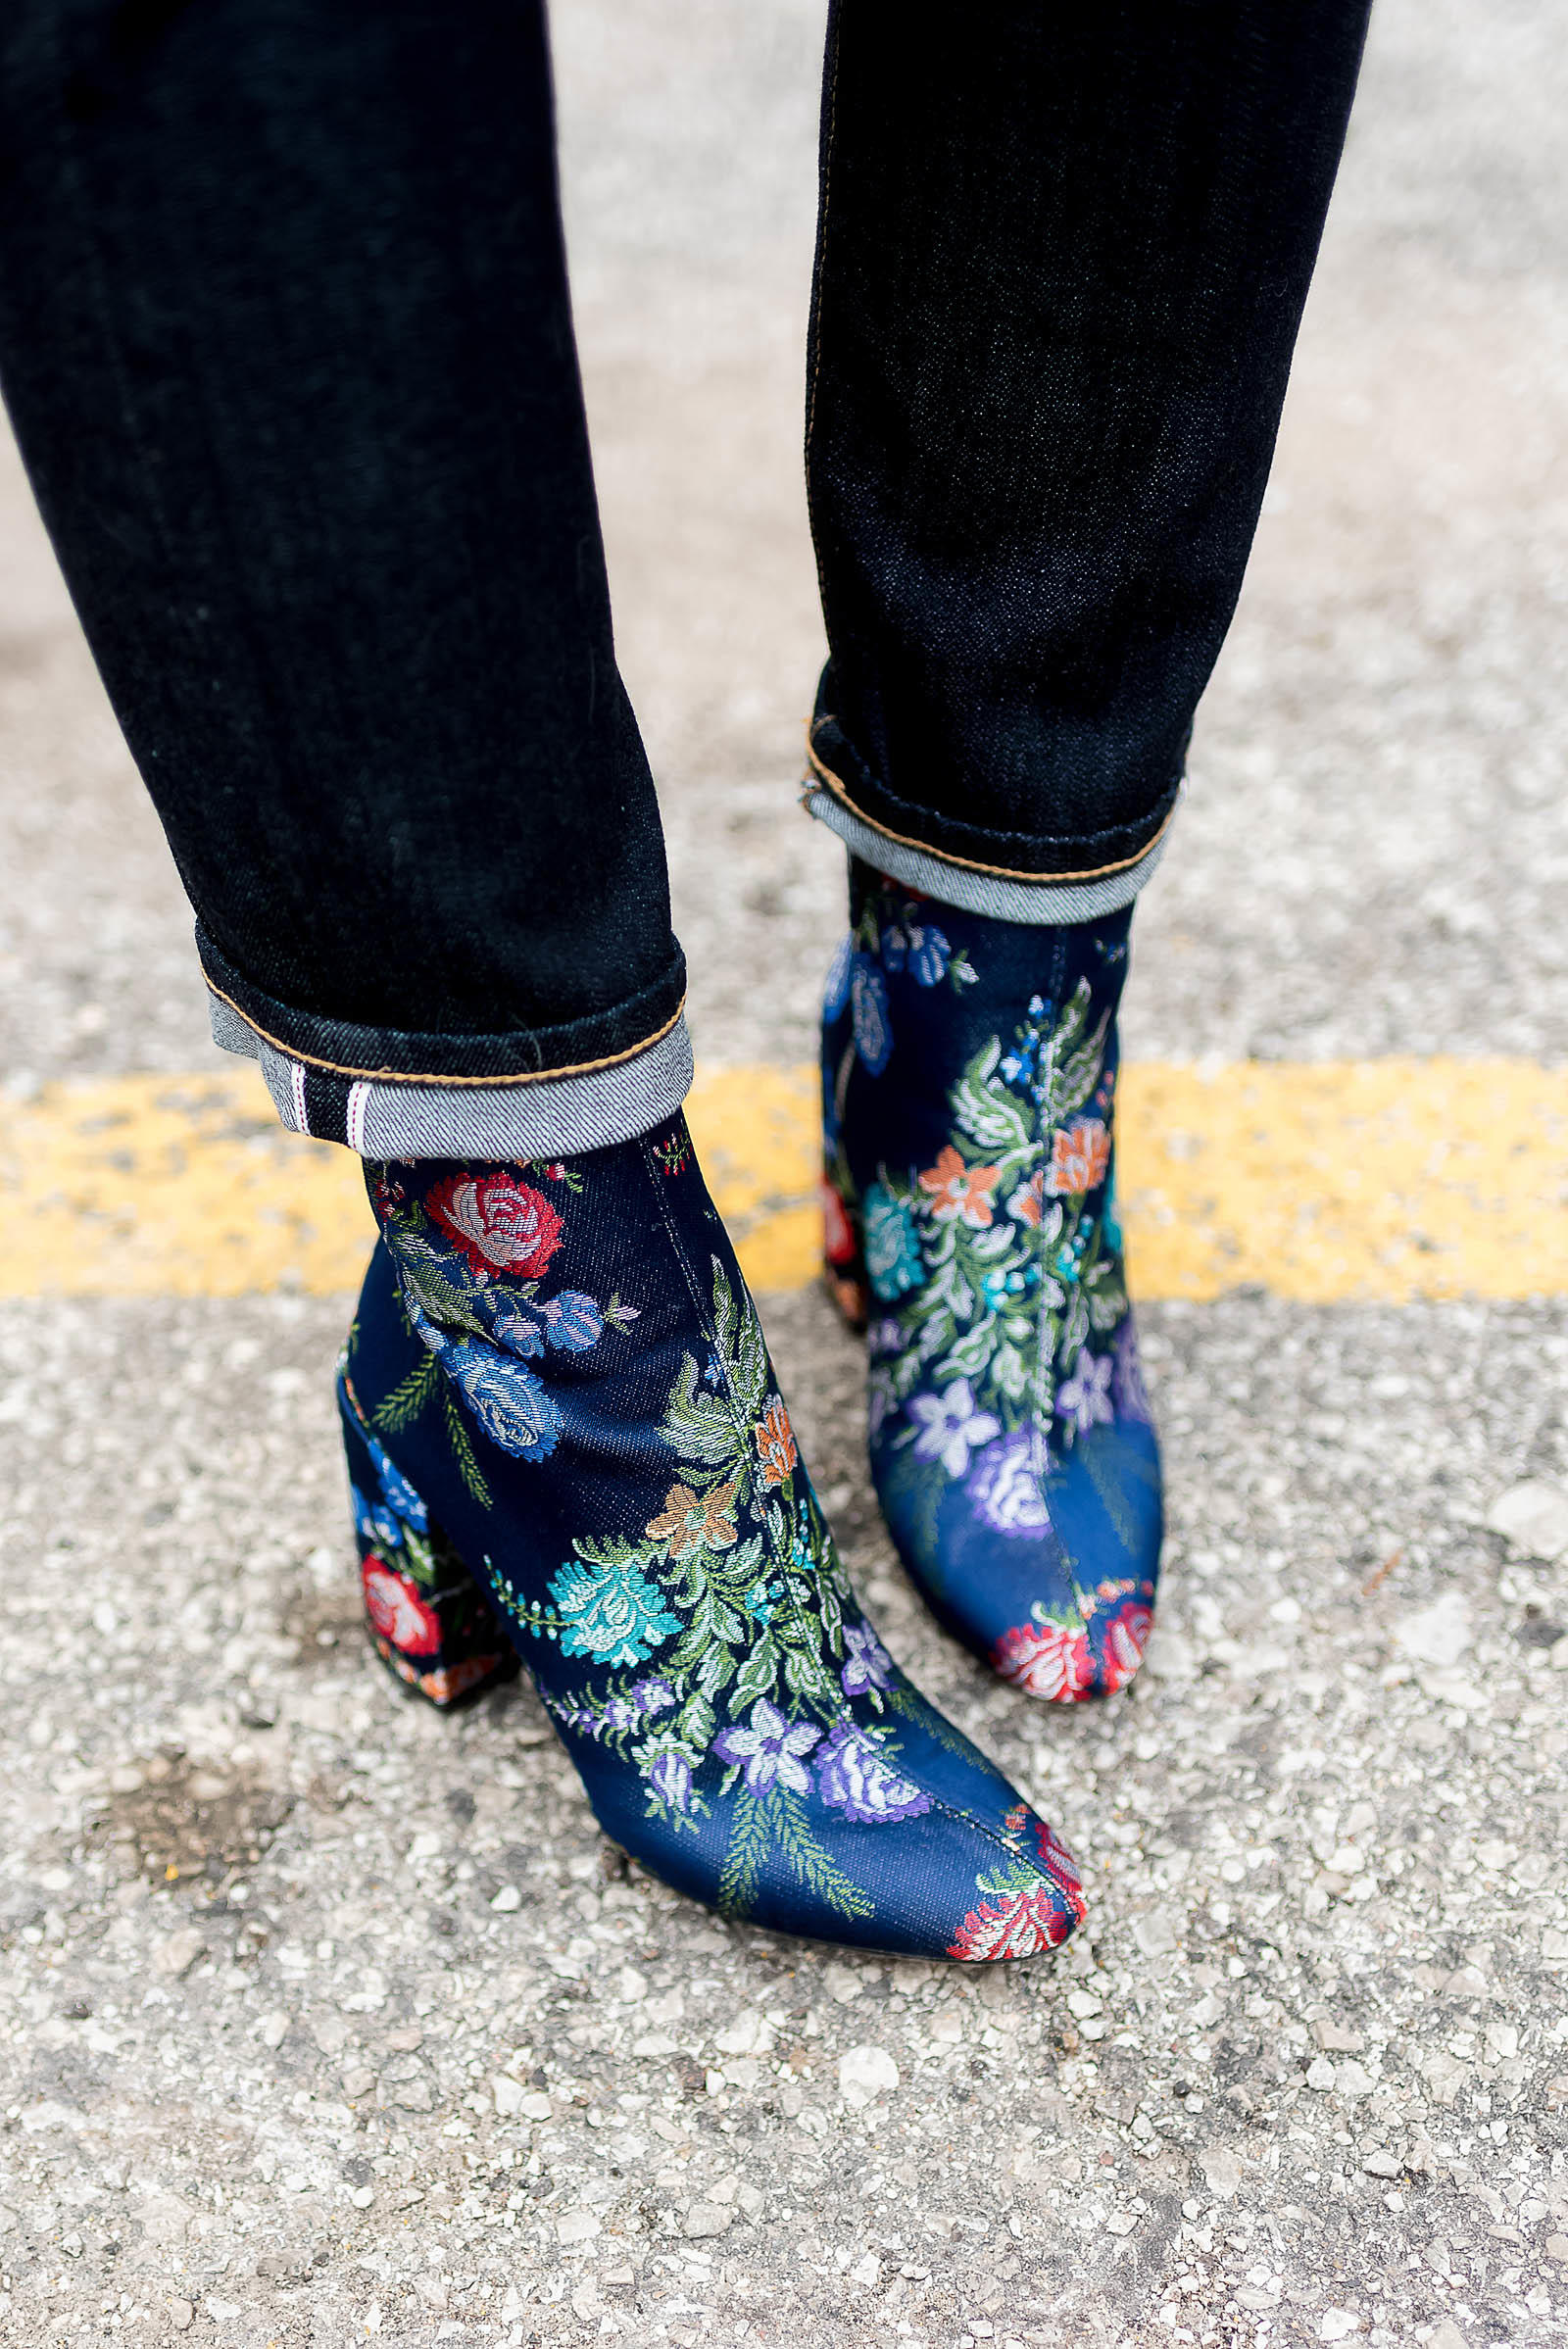 AG Jeans Embroidered Booties Outfit